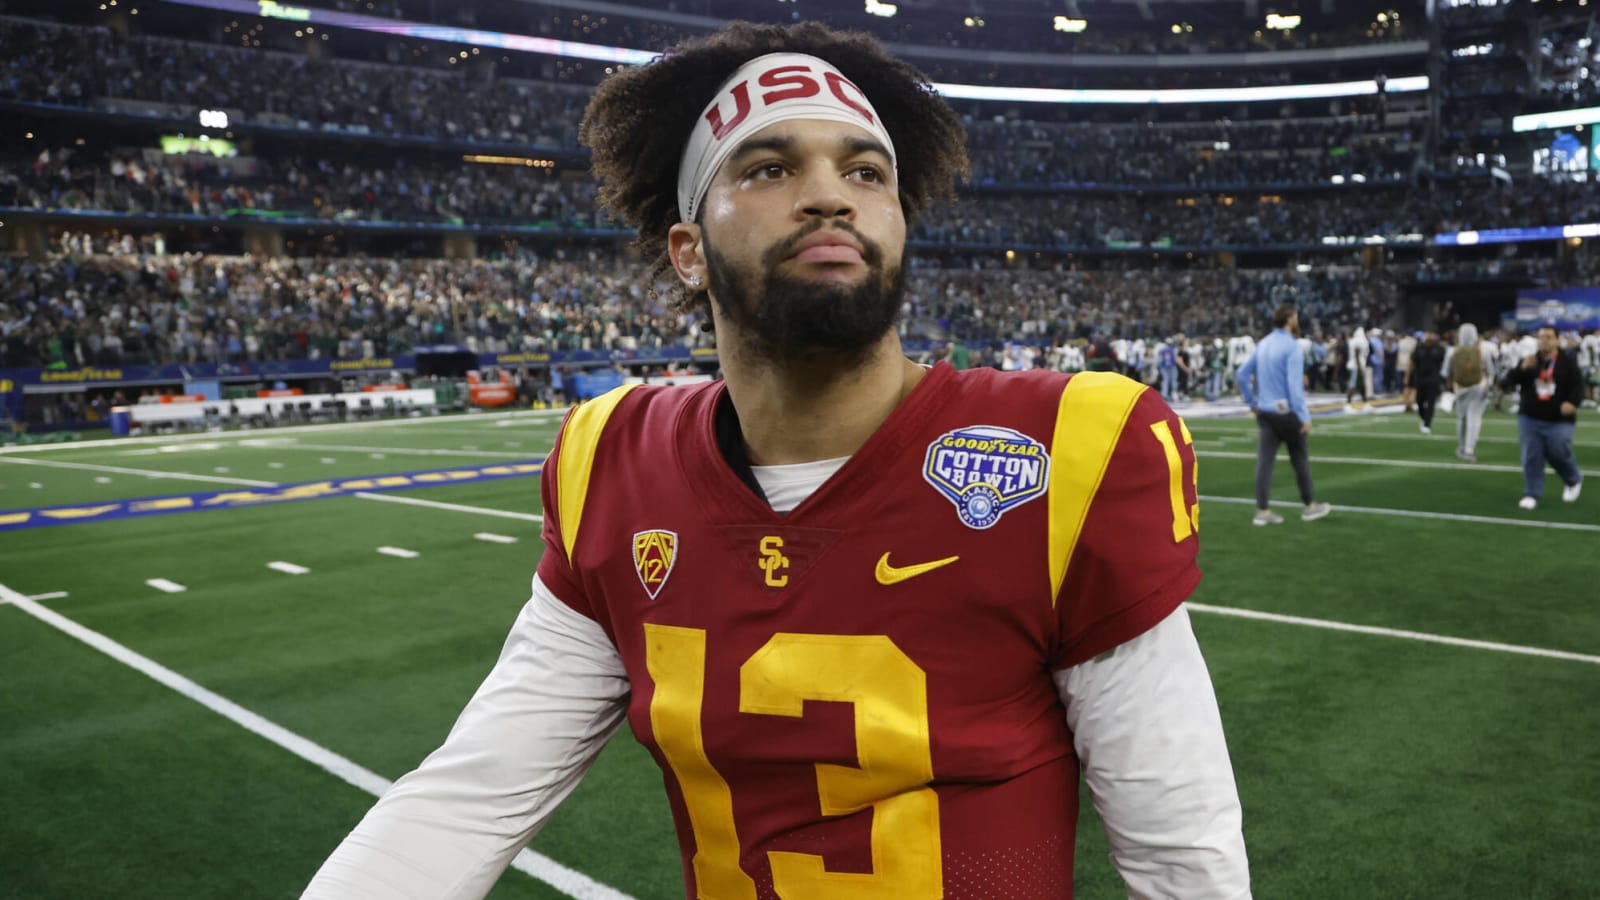 Who will be USC's QB after Caleb Williams' departure?